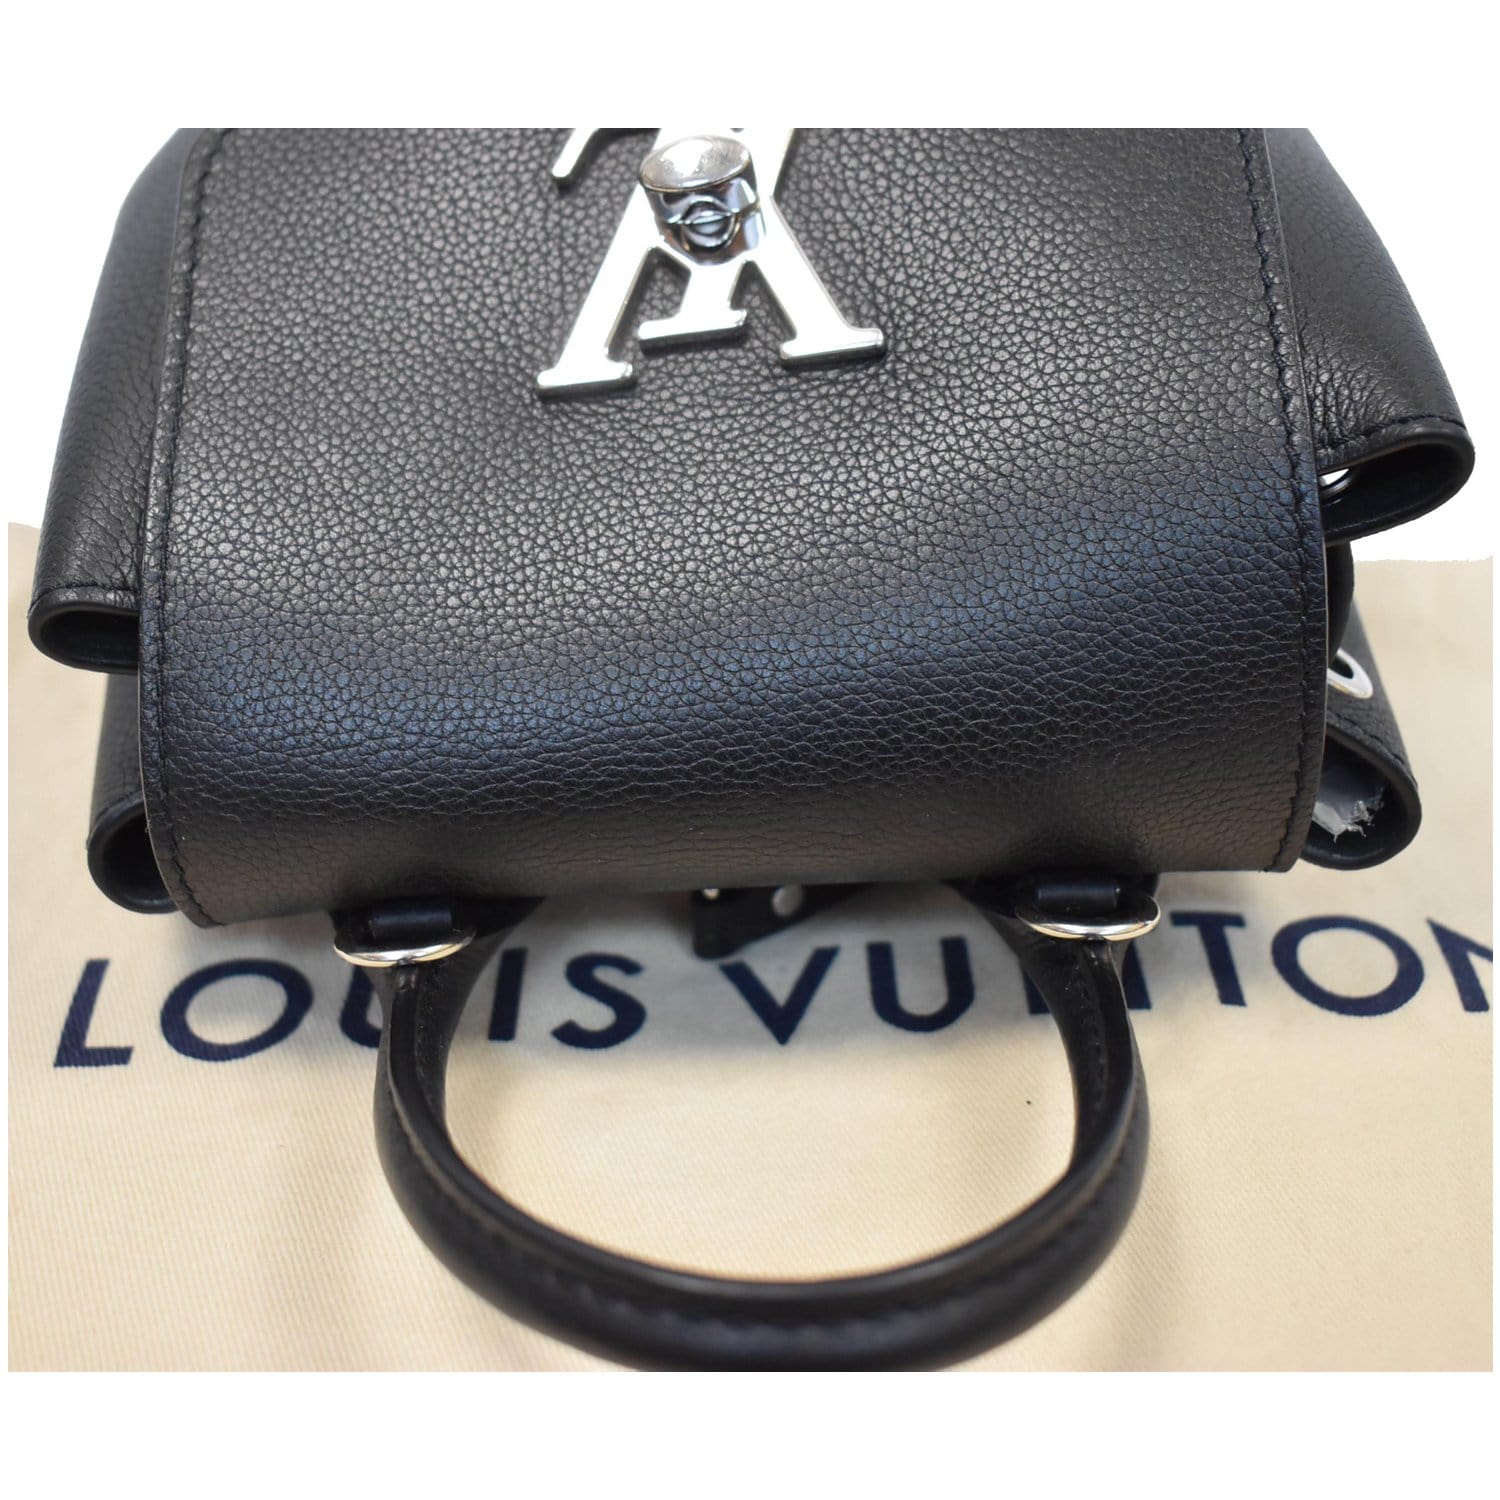 Lockme leather backpack Louis Vuitton Black in Leather - 26519796